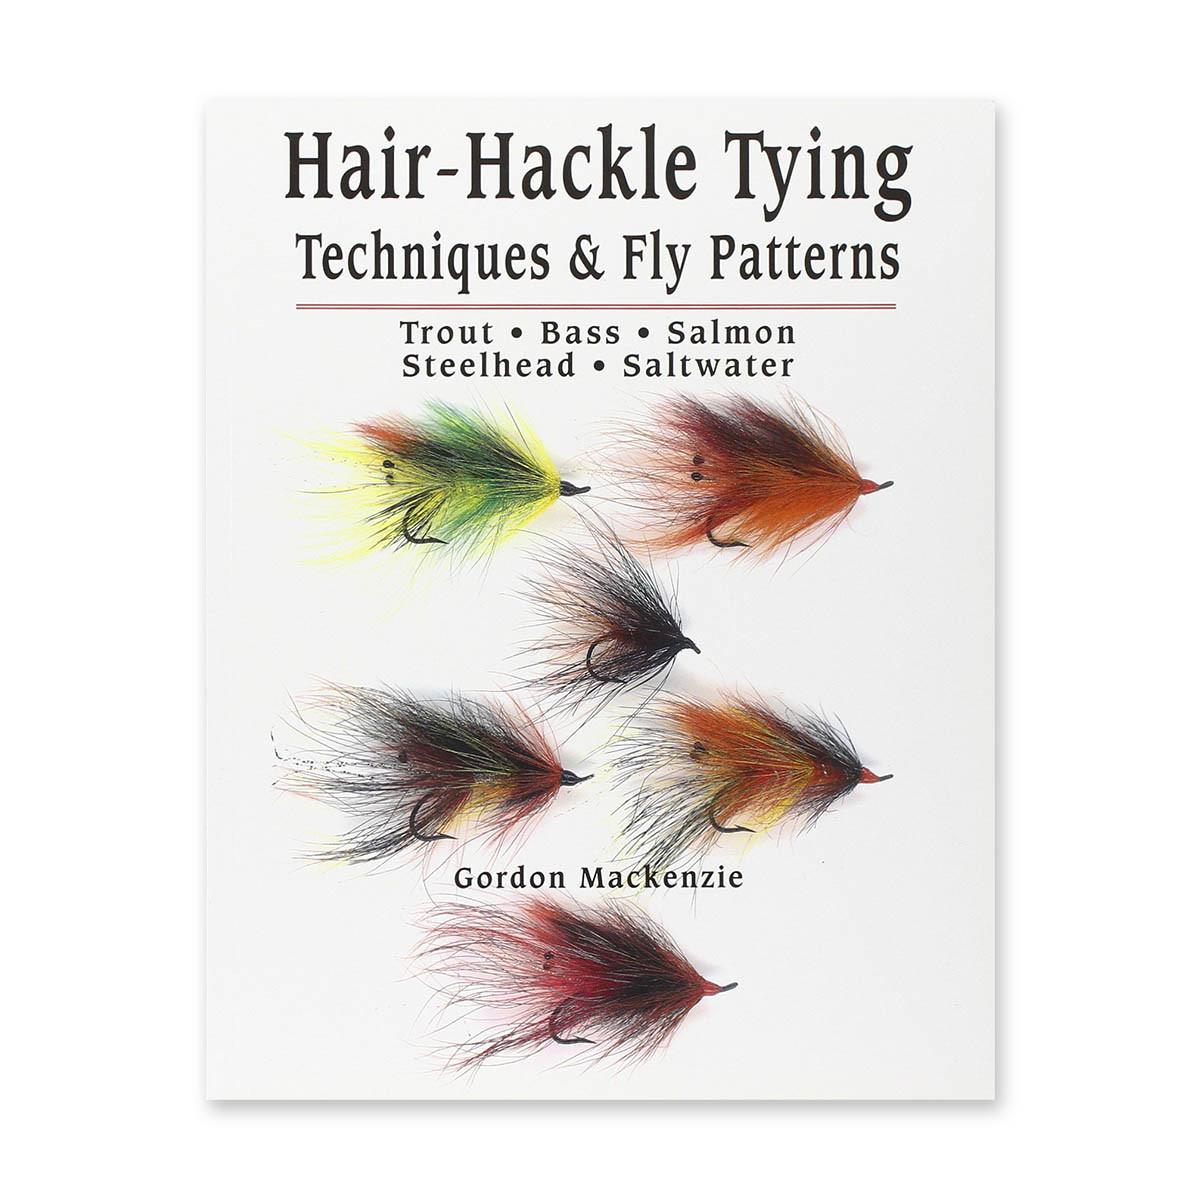 Fly Tying Books, Videos